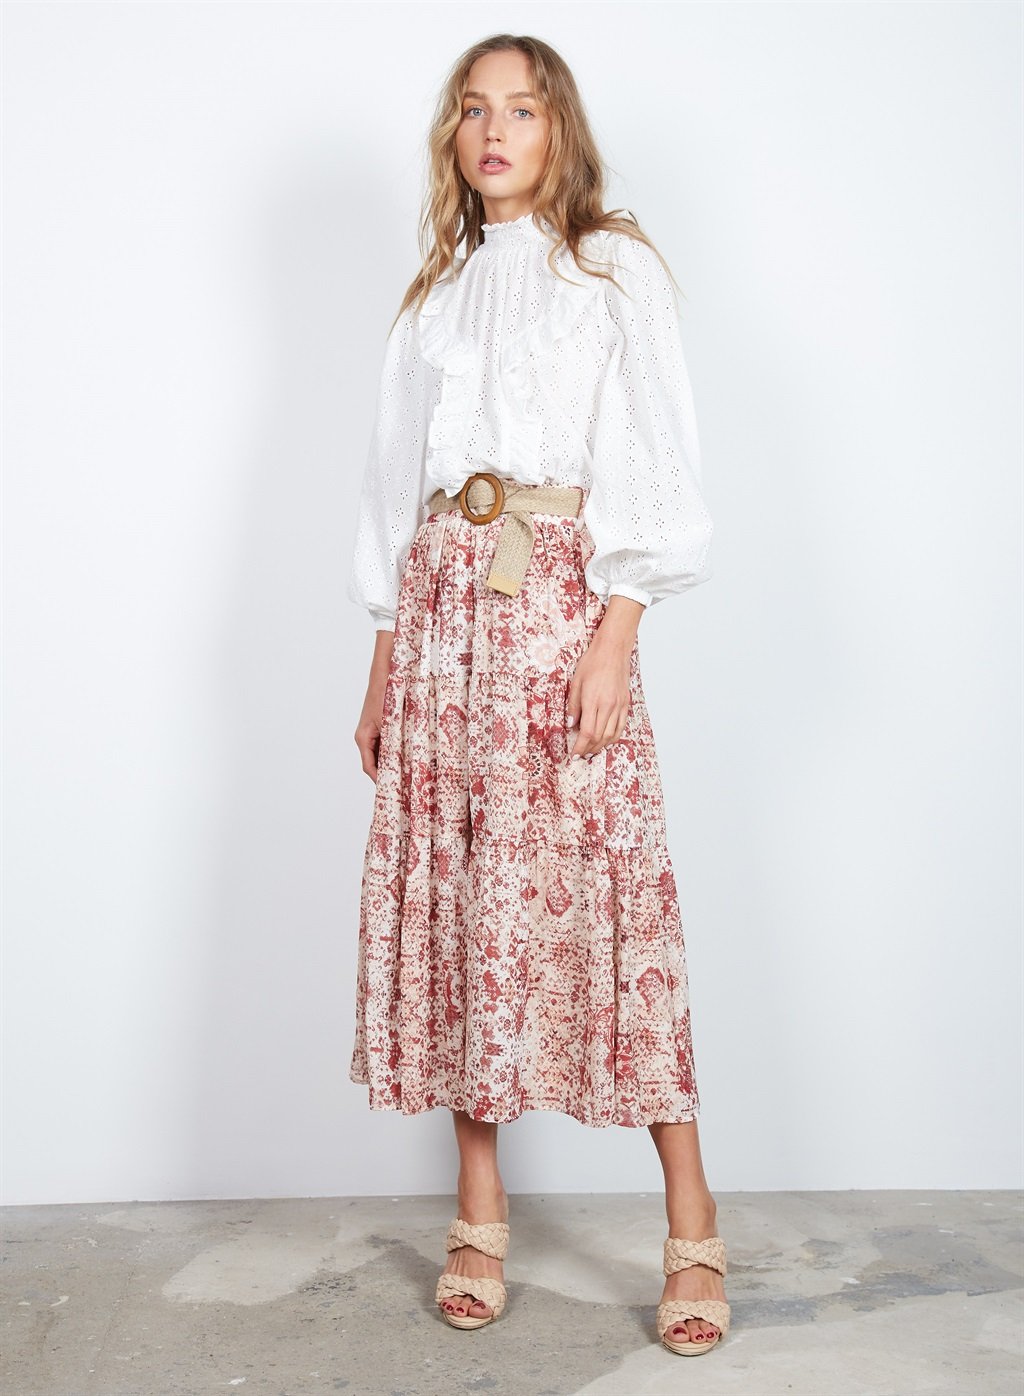 Wanderer Skirt by Wish the Label